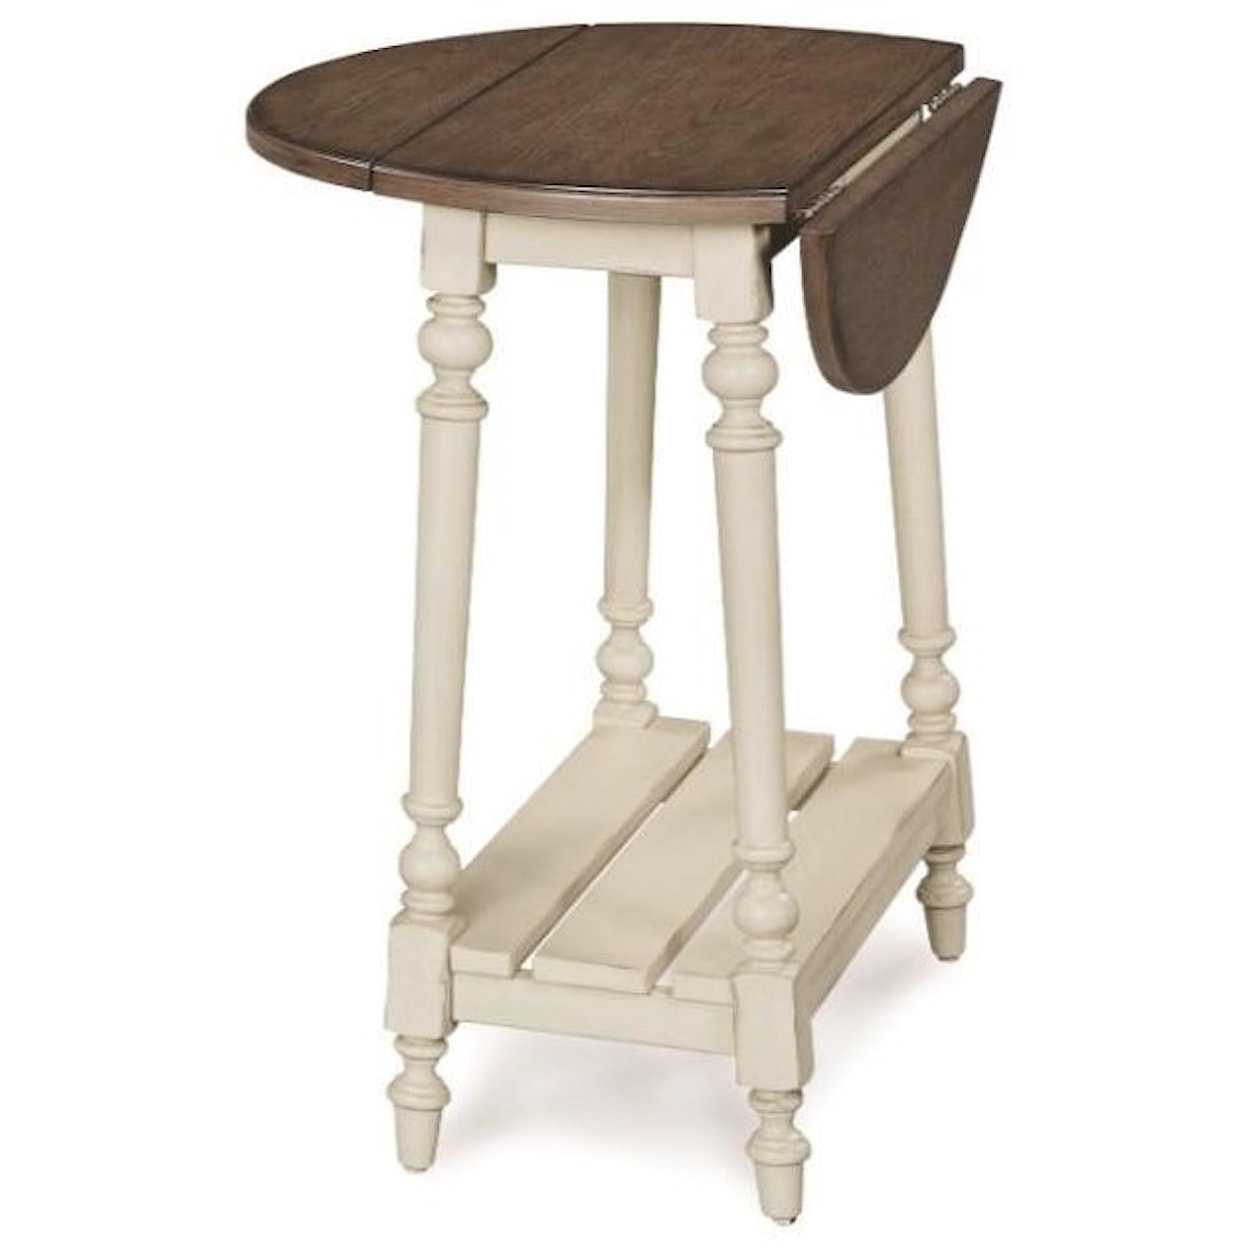 Null Furniture 6618 Expressions Drop Leaf End Table